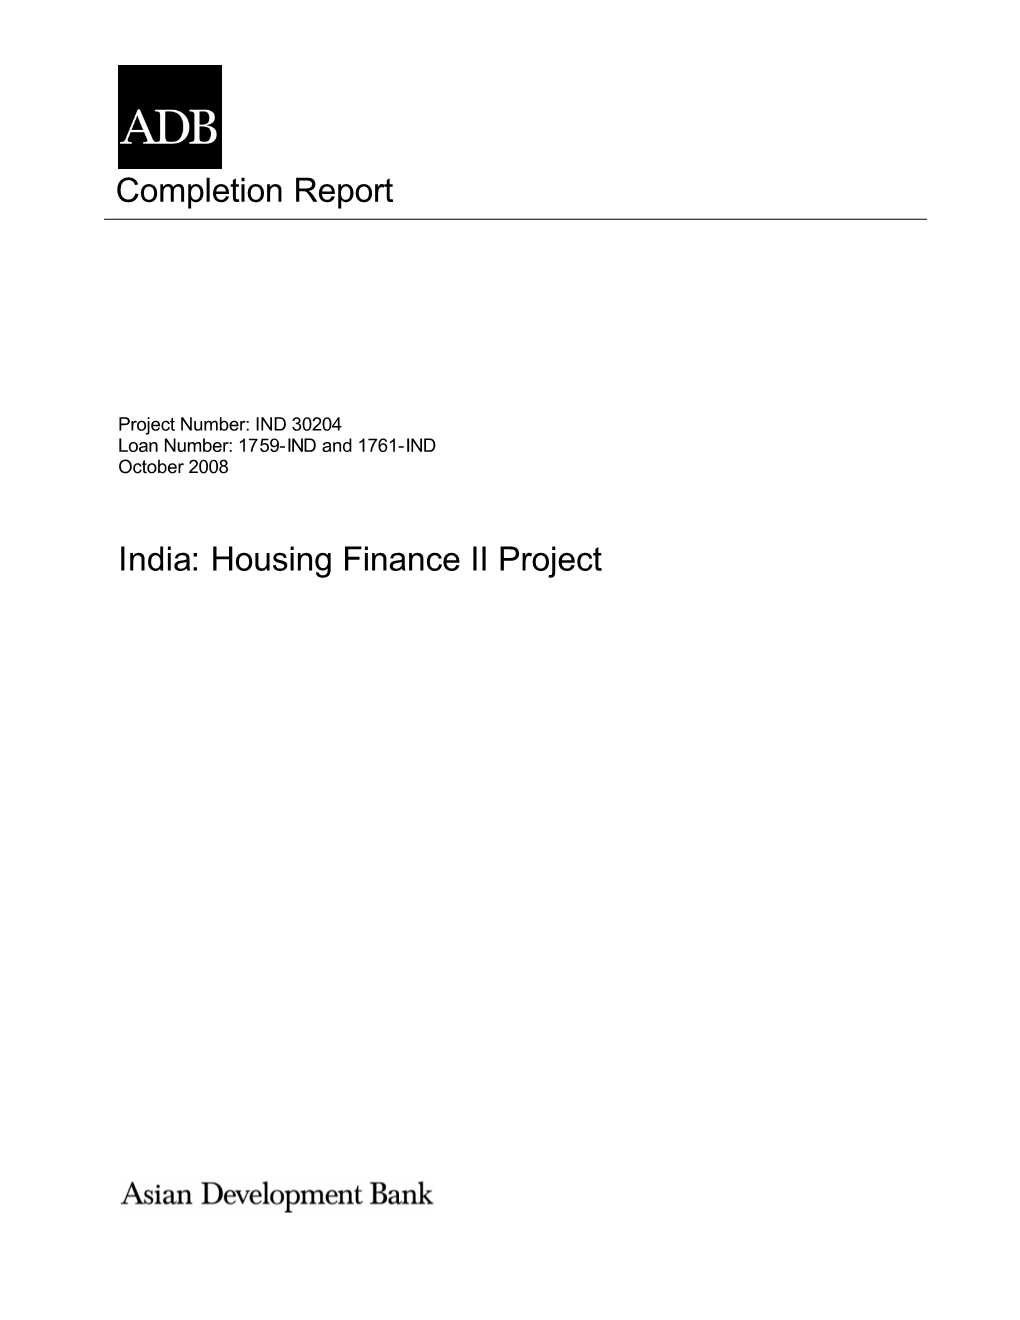 Completion Report India: Housing Finance